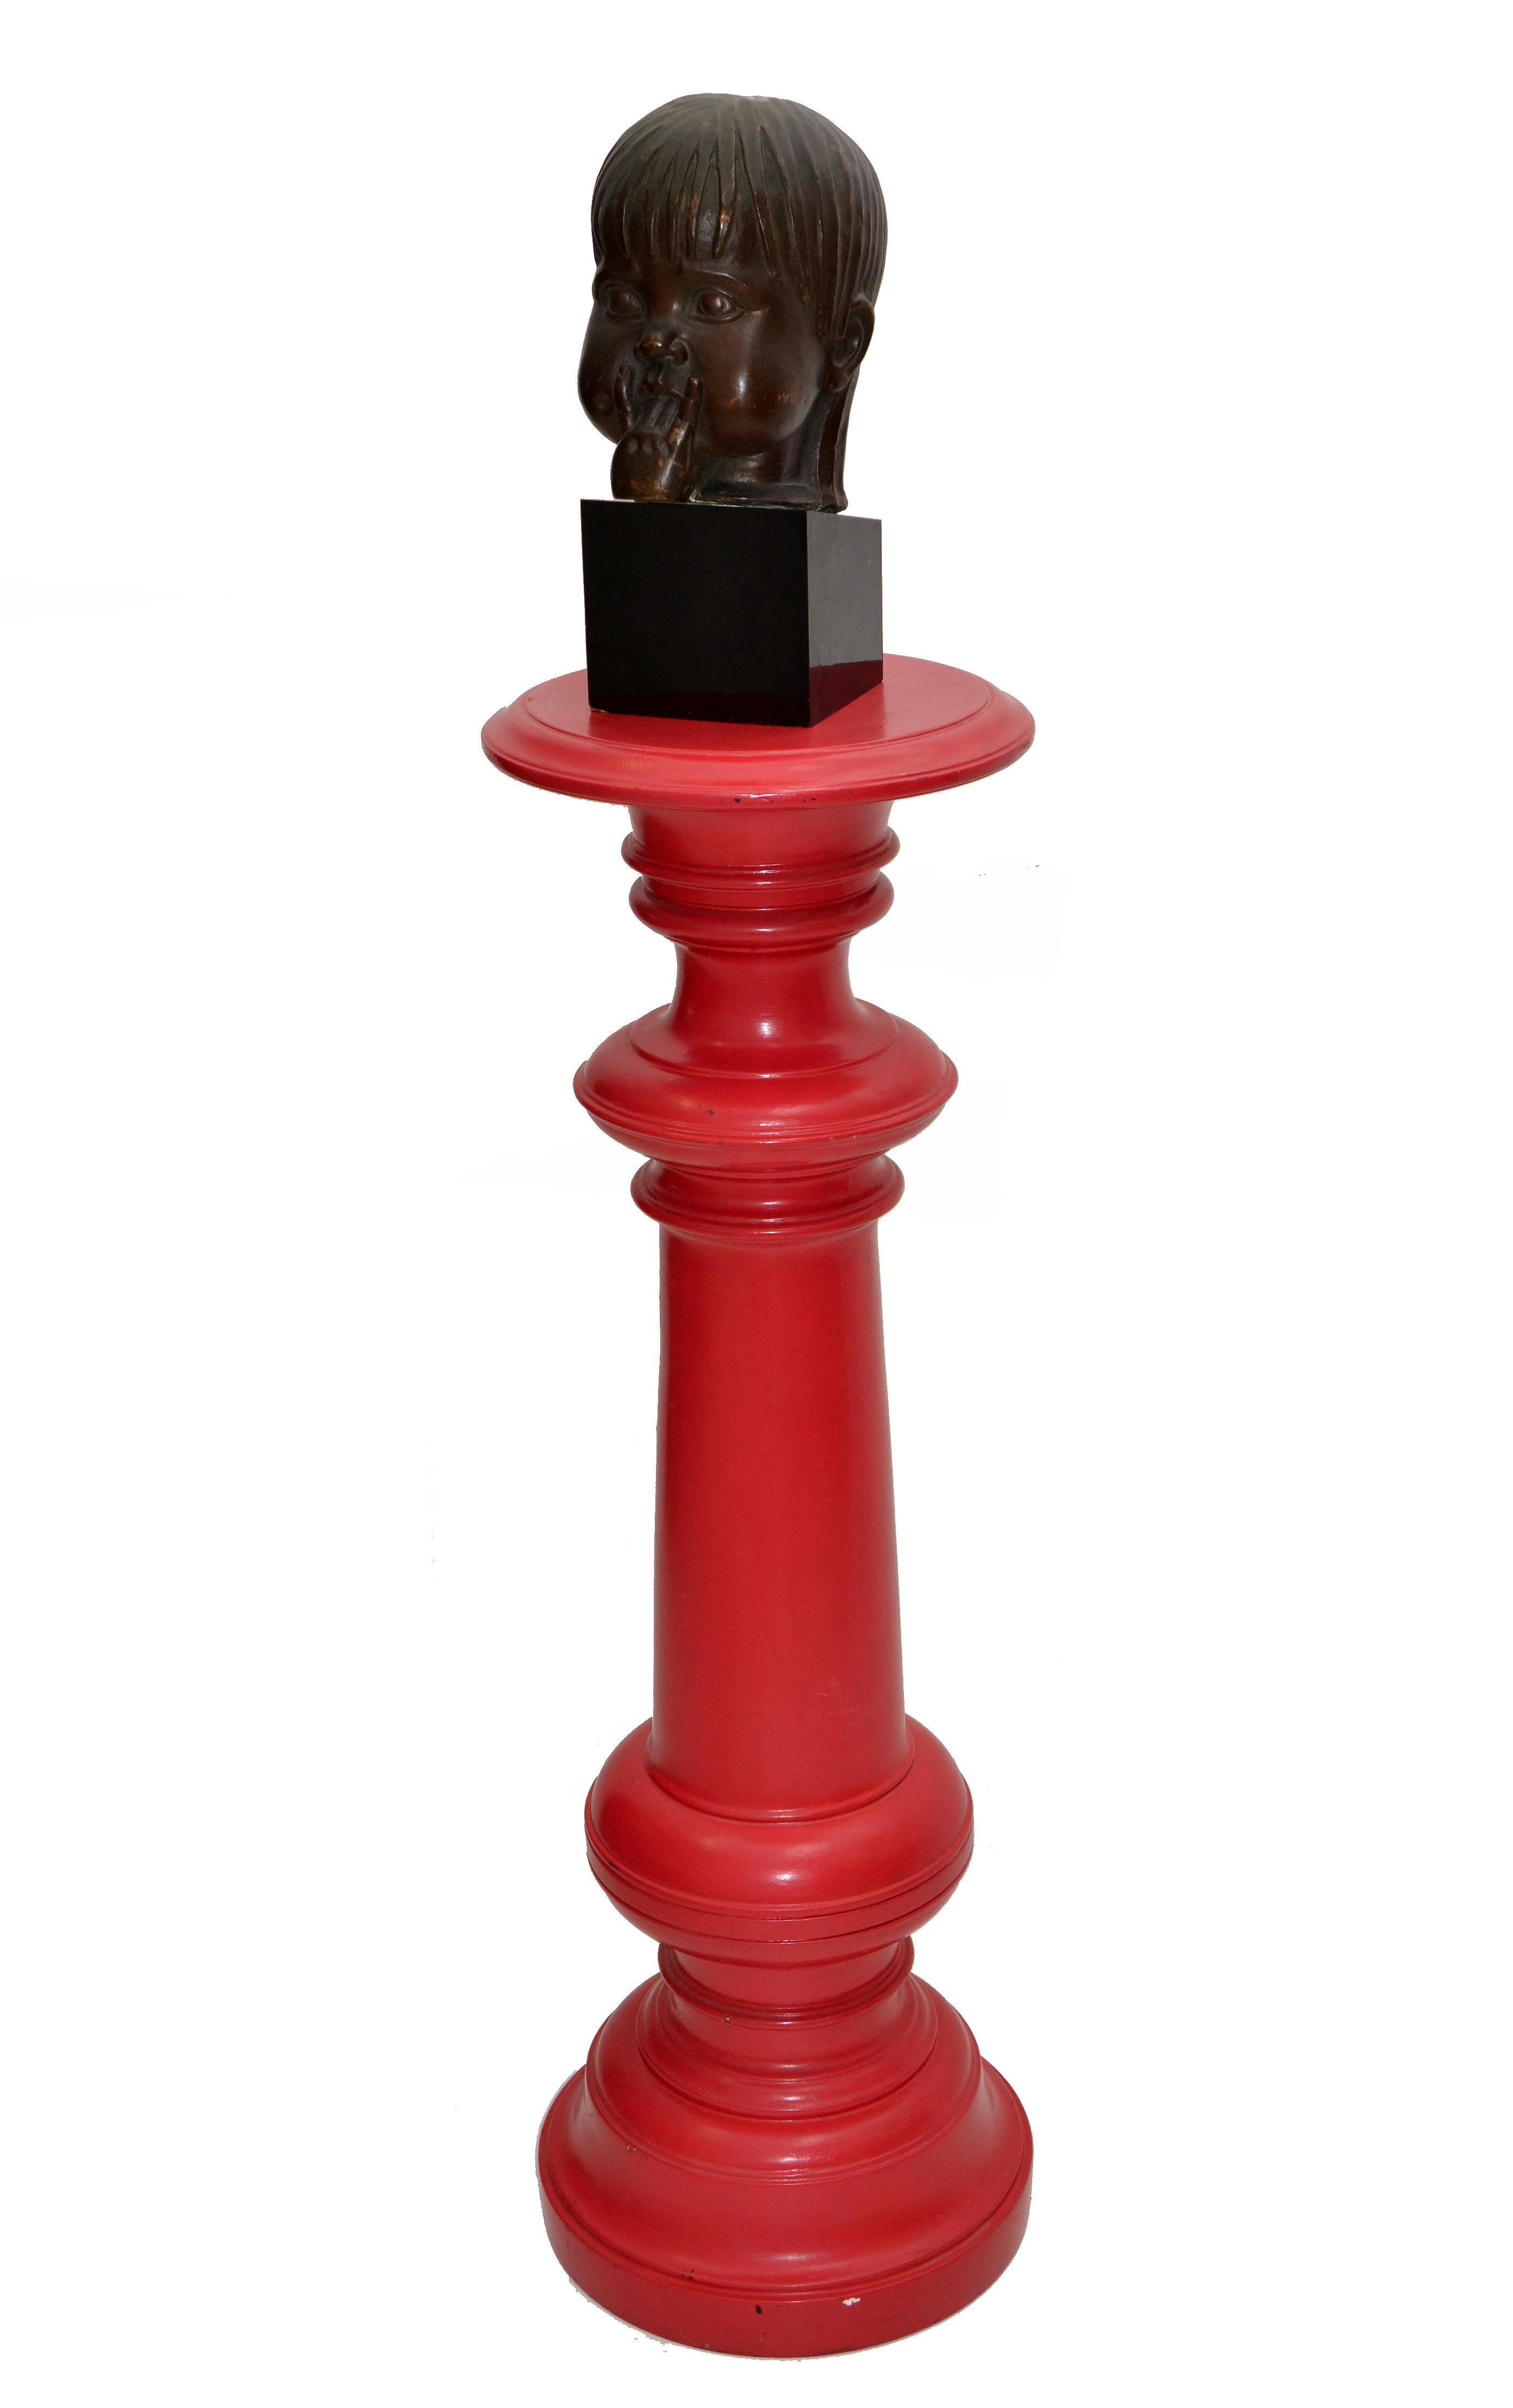 Tall Mid-Century Modern Turned Wood Red Finish Plant Stand Sculpture Pedestal In Good Condition For Sale In Miami, FL